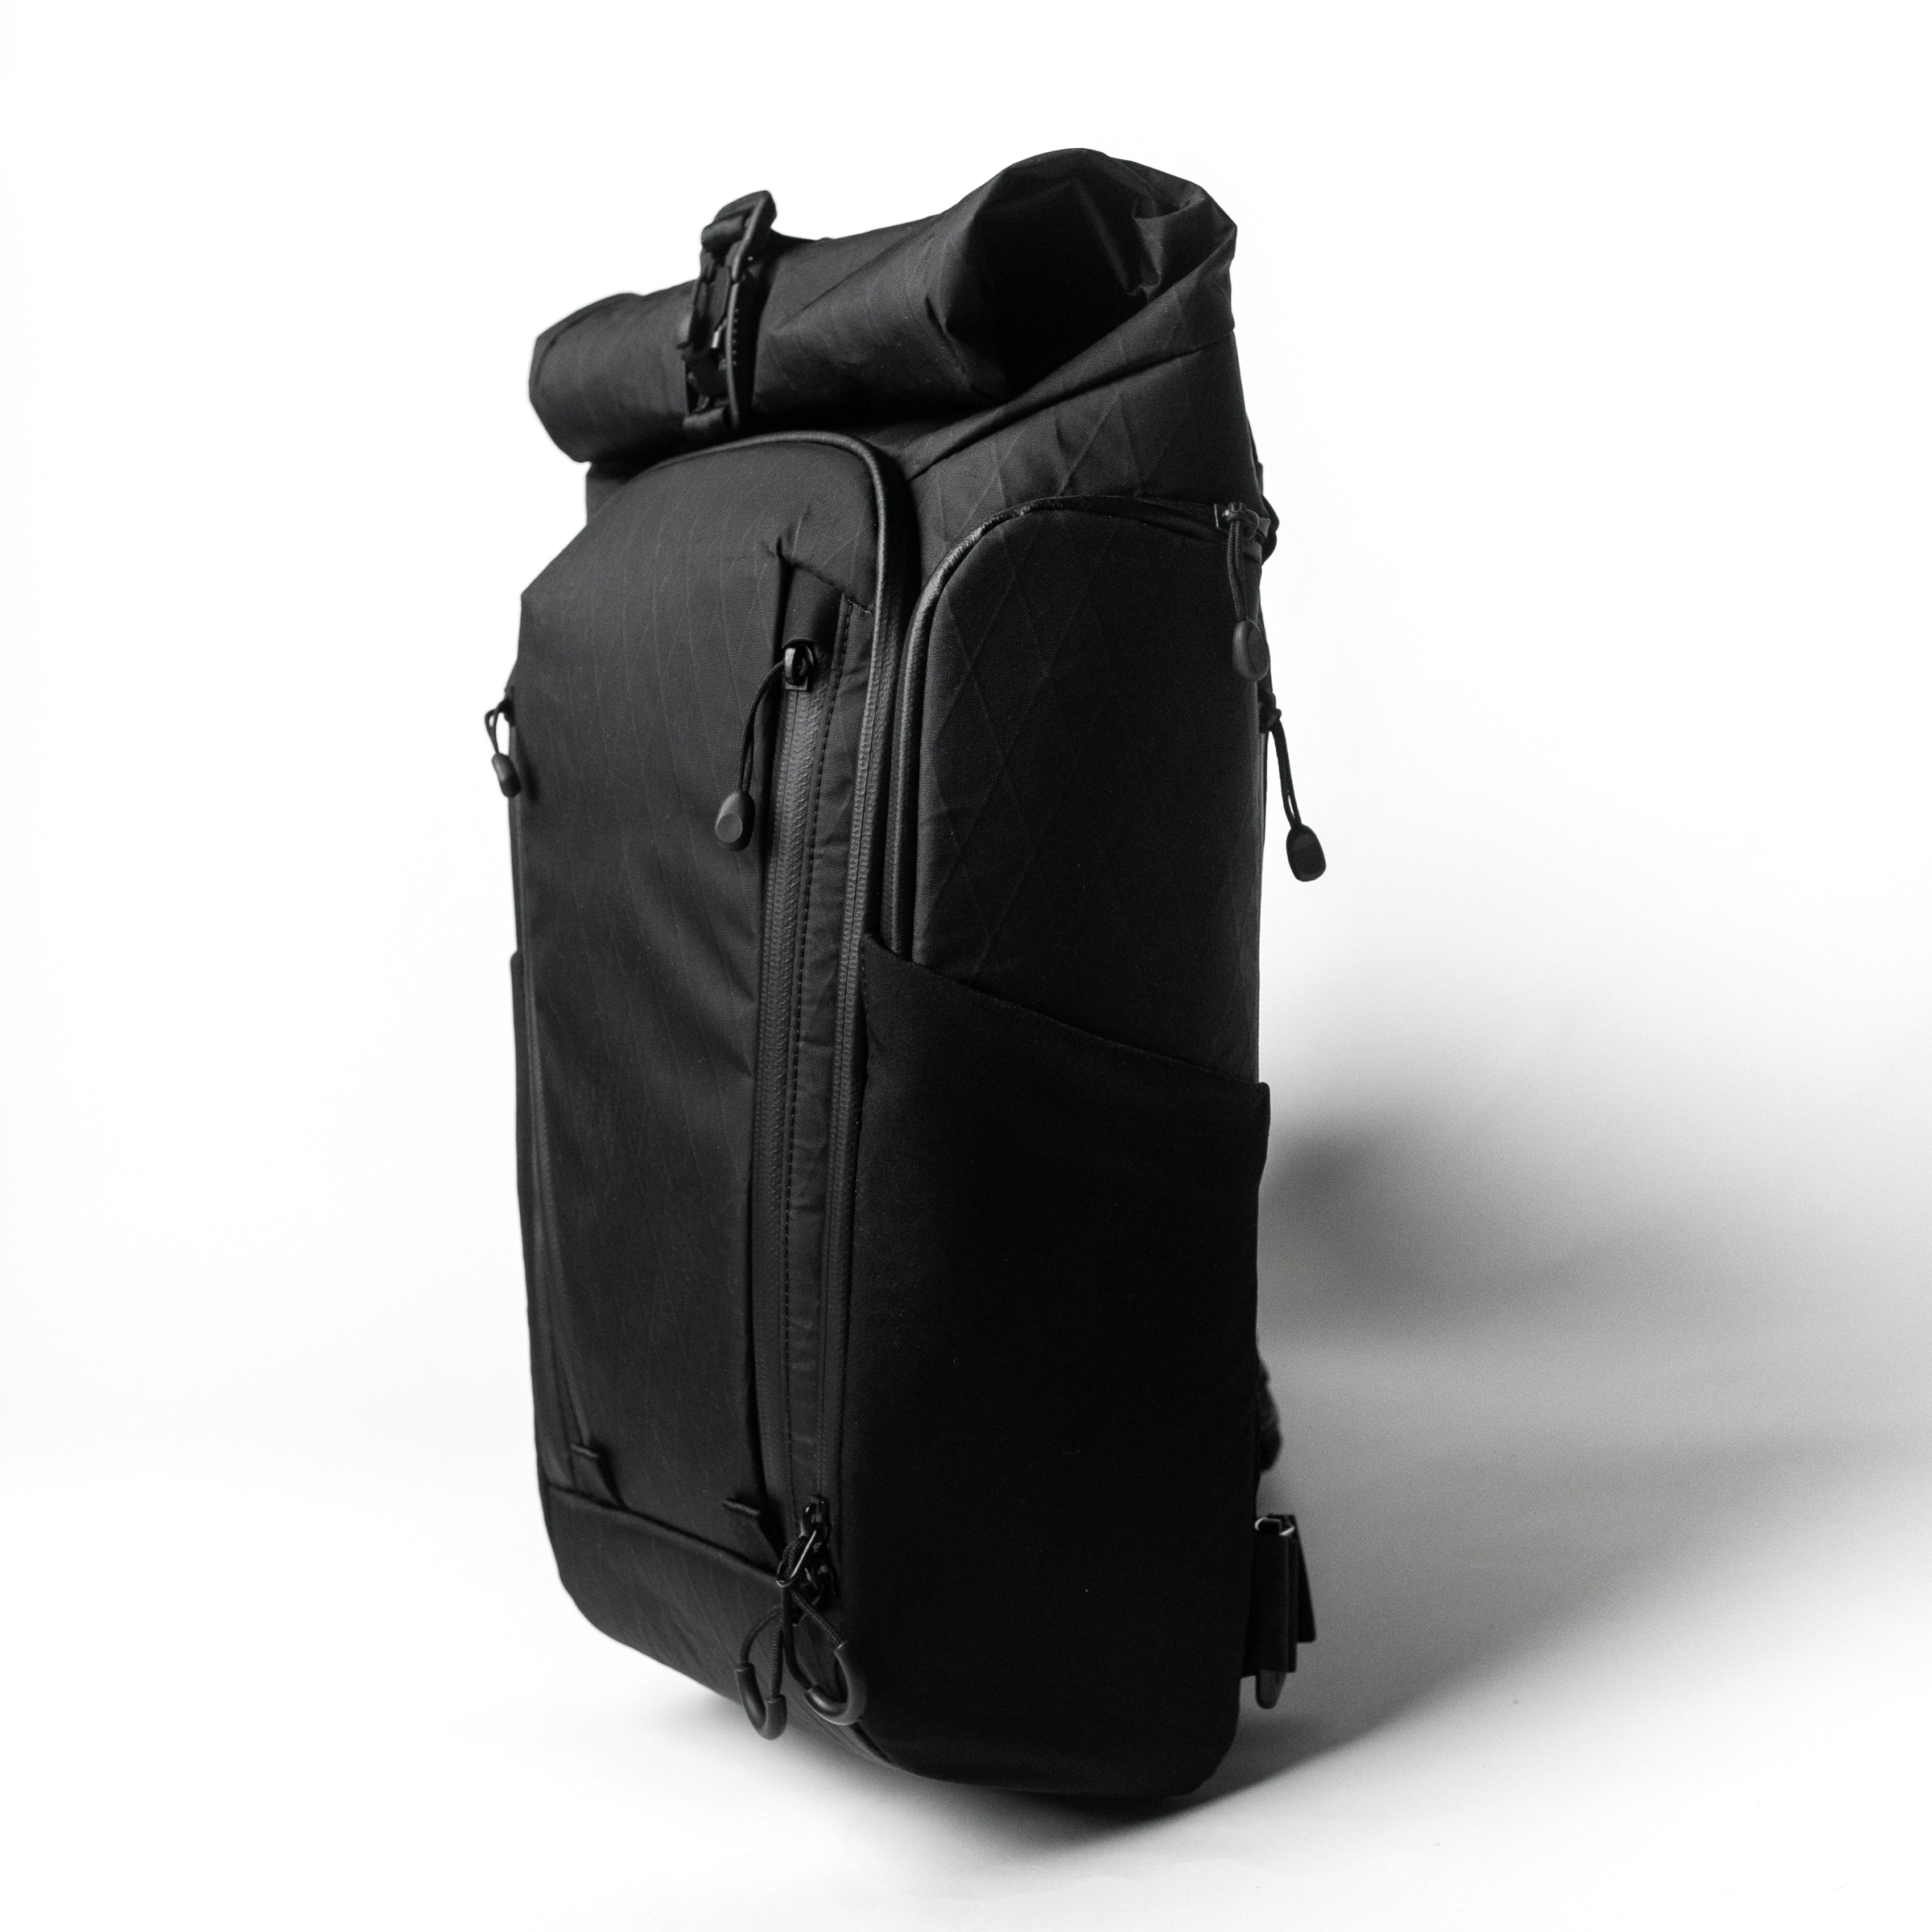 Modern Dayfarer Launches New Active Sling Pack - Carryology 